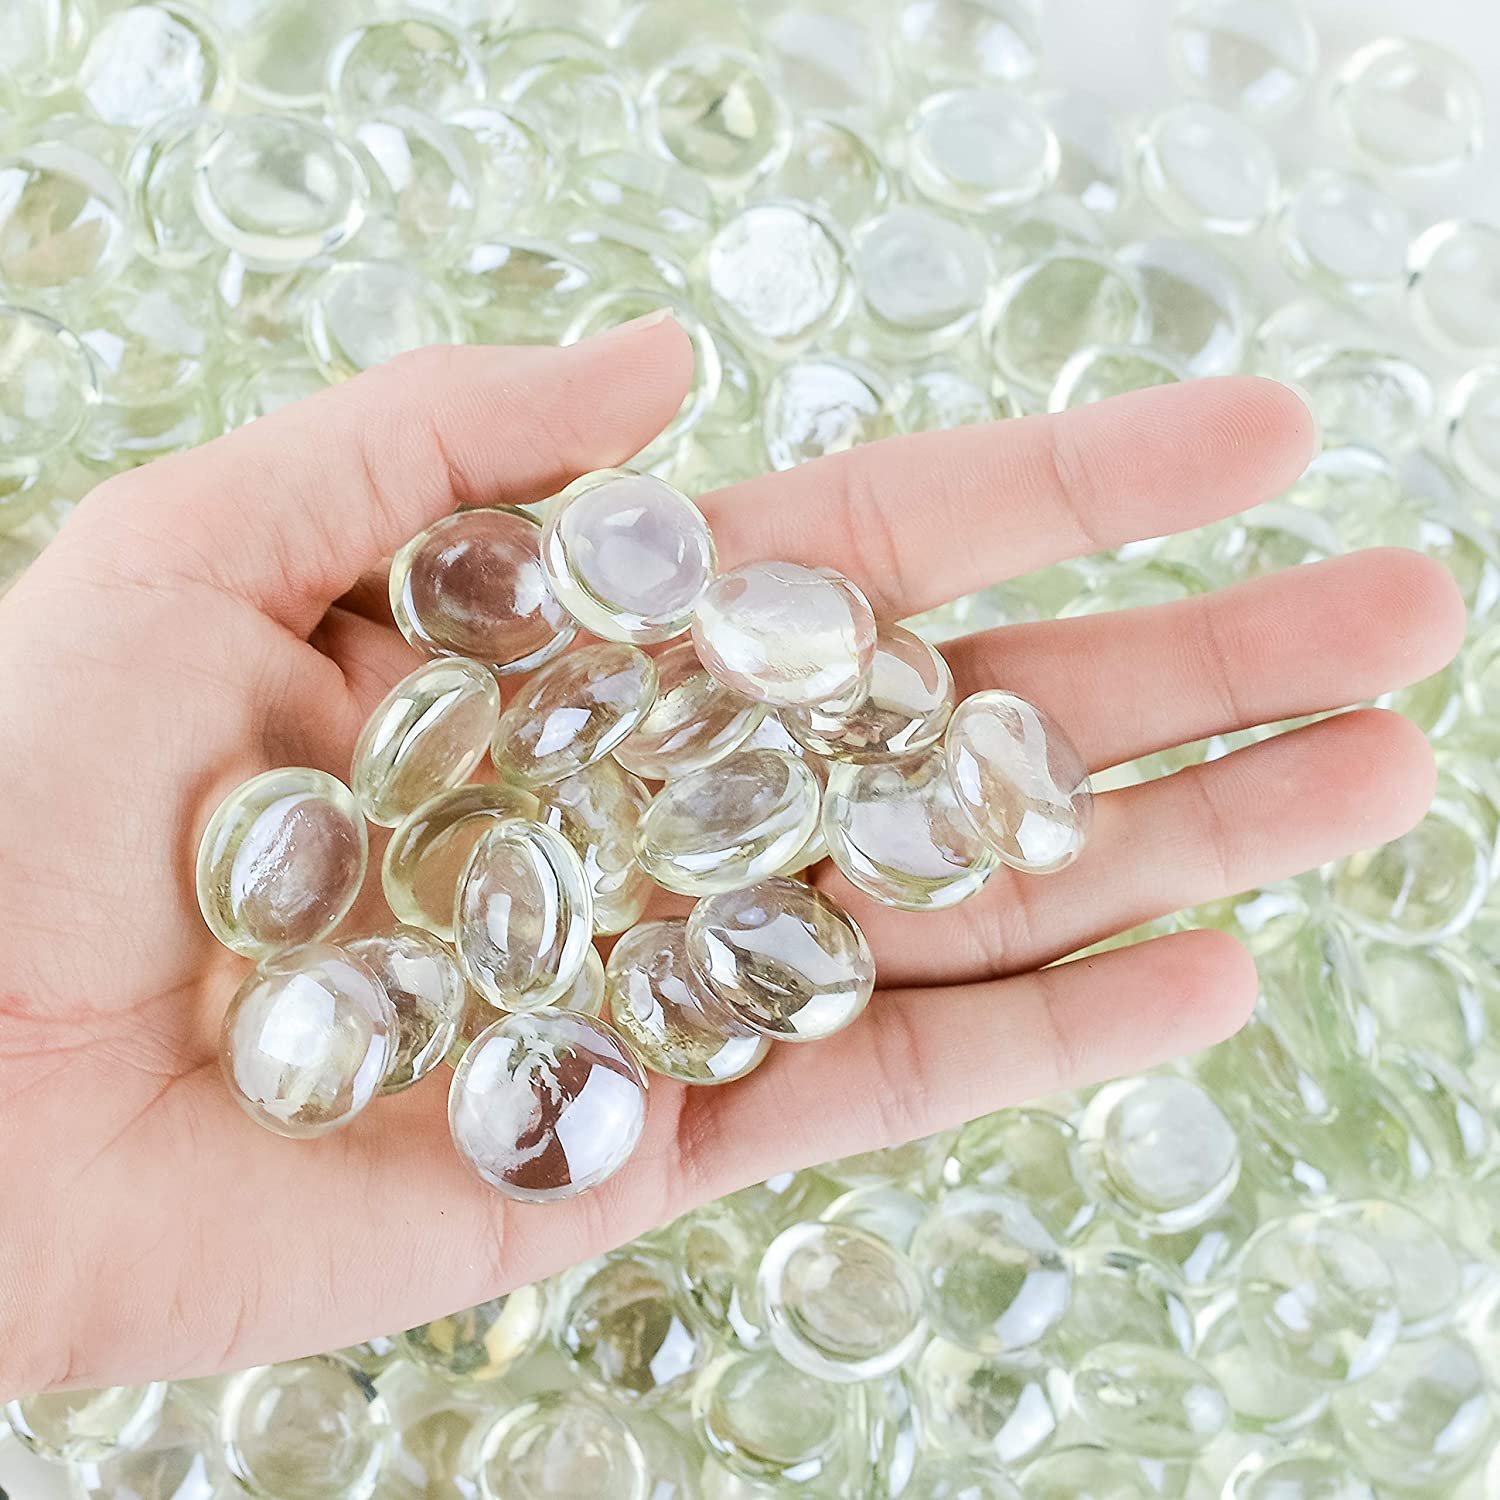 Galashield Clear Flat Glass Marbles for Vases Glass Gems Beads Pebbles Vase Filler 5 lbs, Approx. 450 Pcs - image 5 of 6